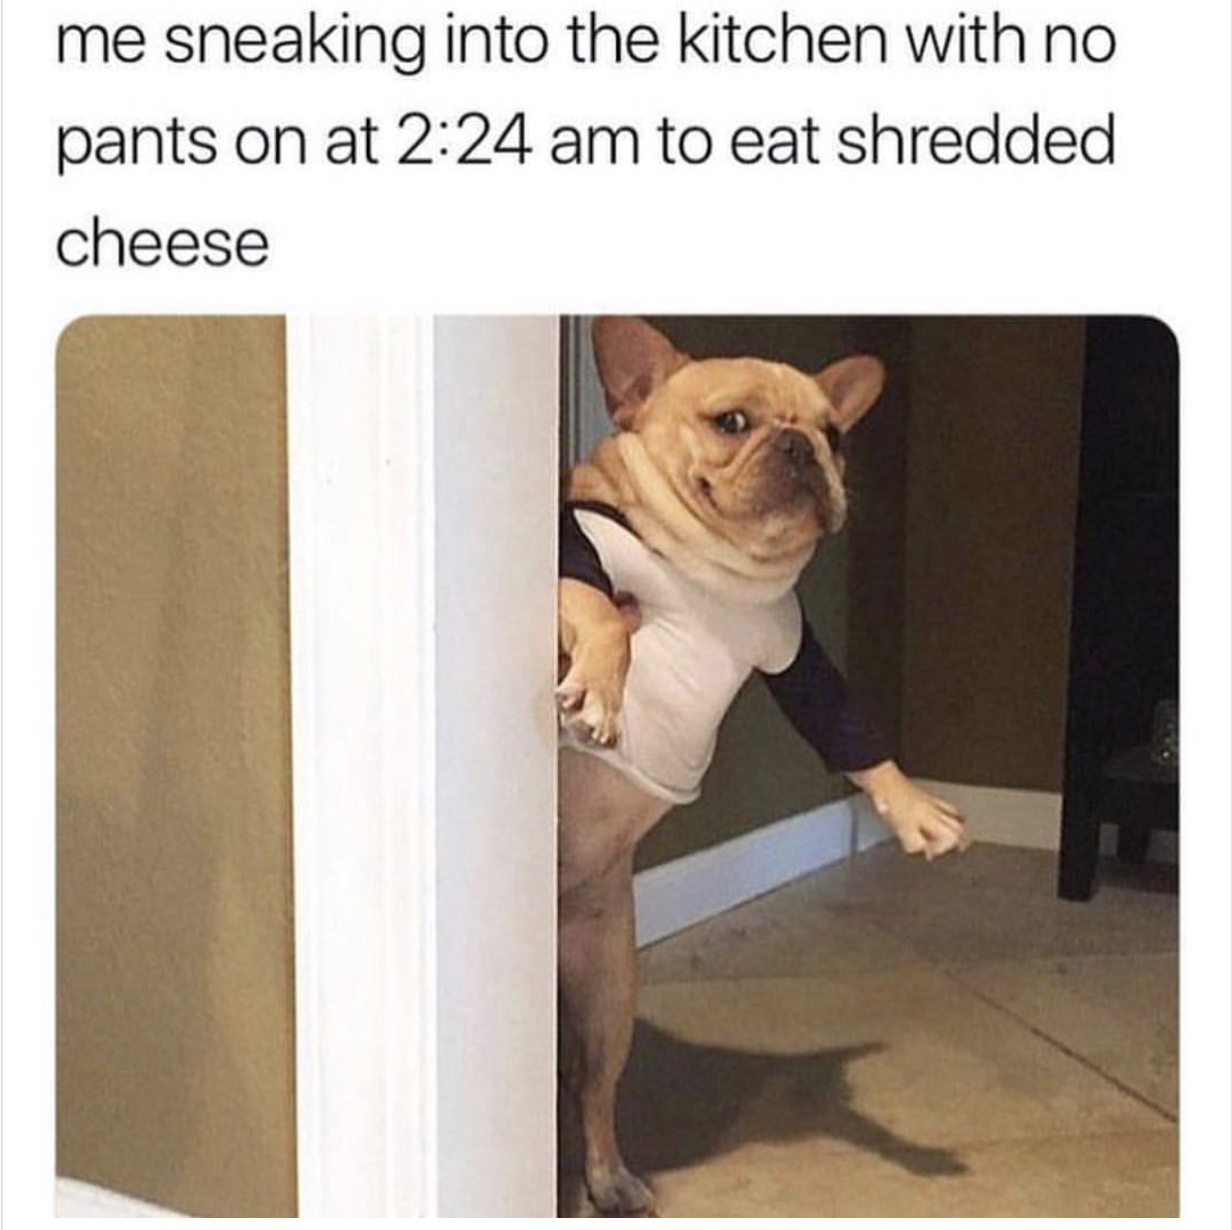 shredded cheese meme dog - me sneaking into the kitchen with no pants on at to eat shredded cheese